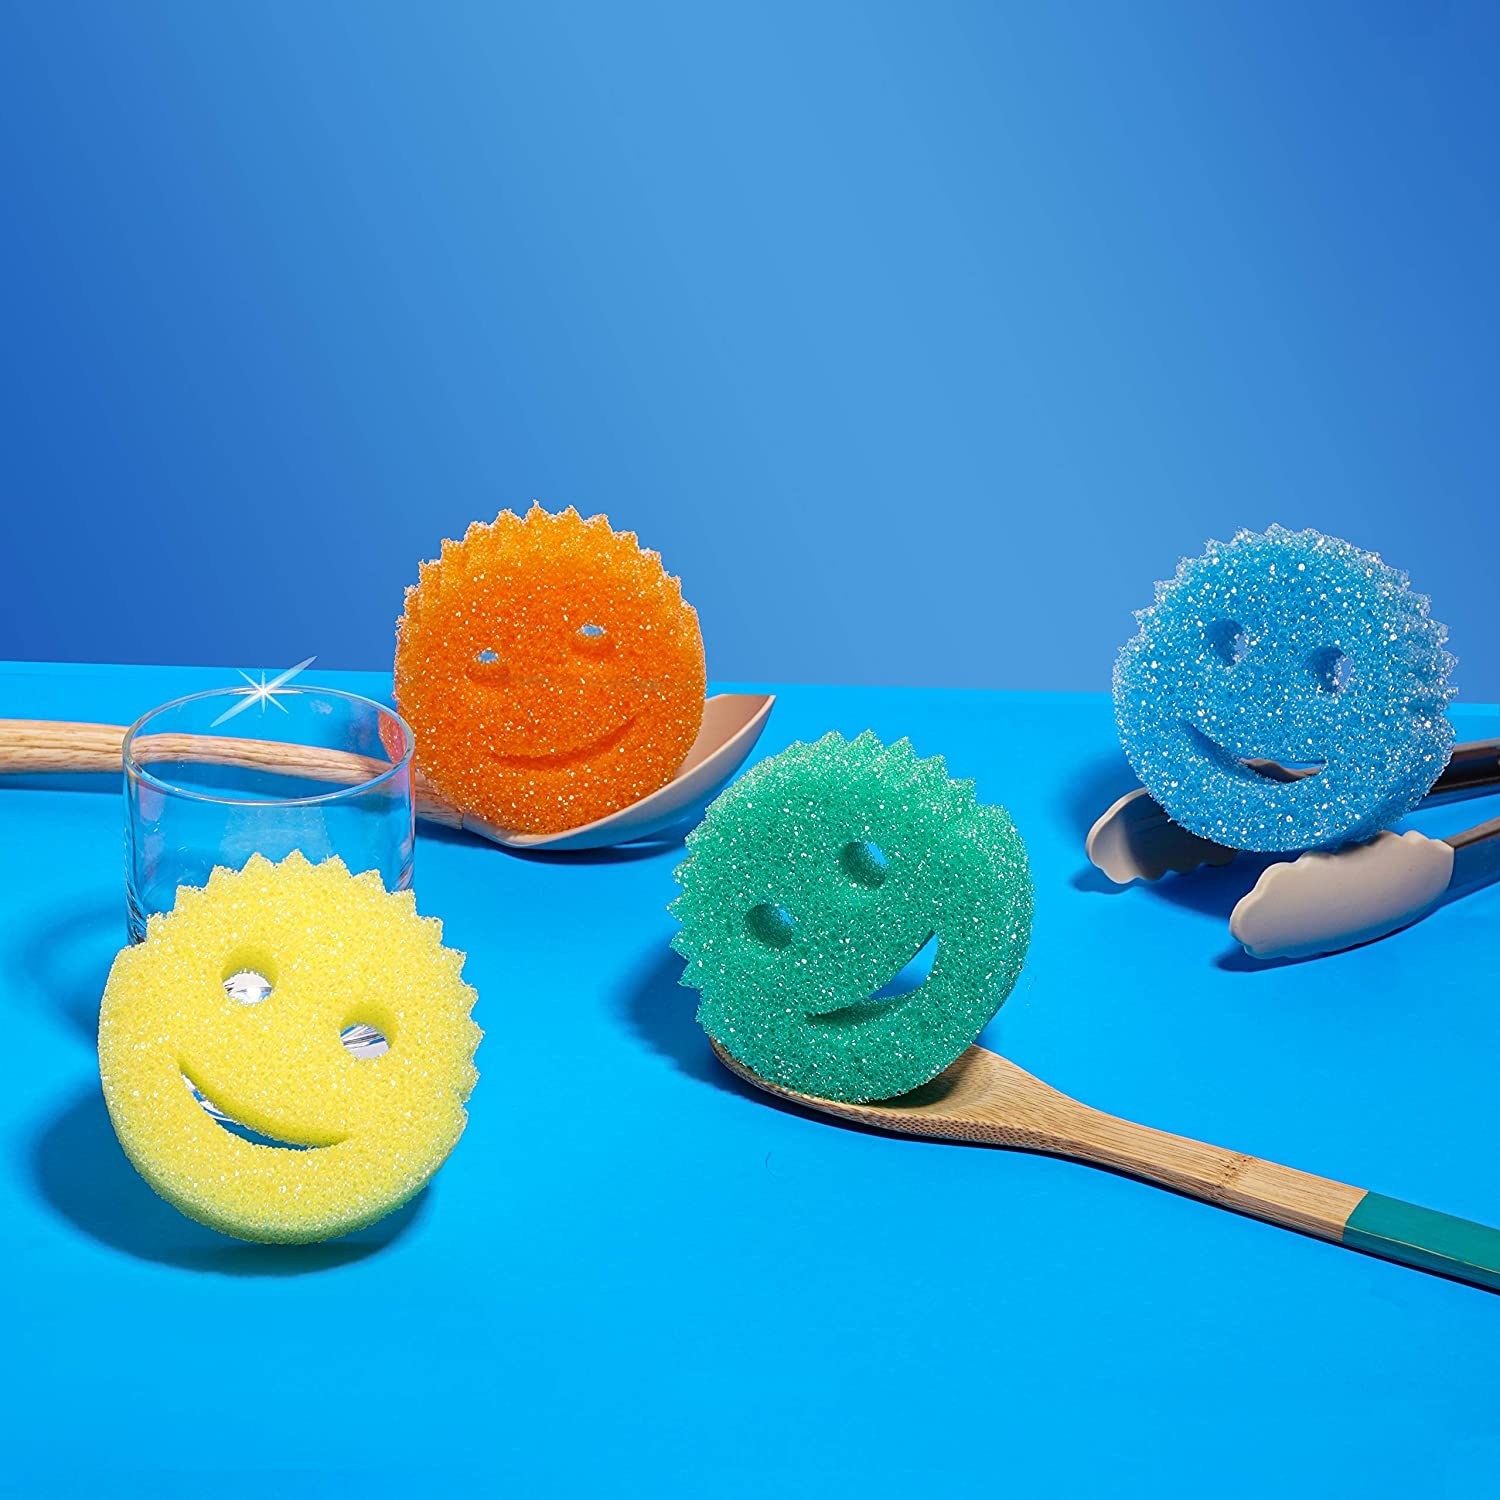 The smiley face shaped sponges in yellow, orange, green, and blue